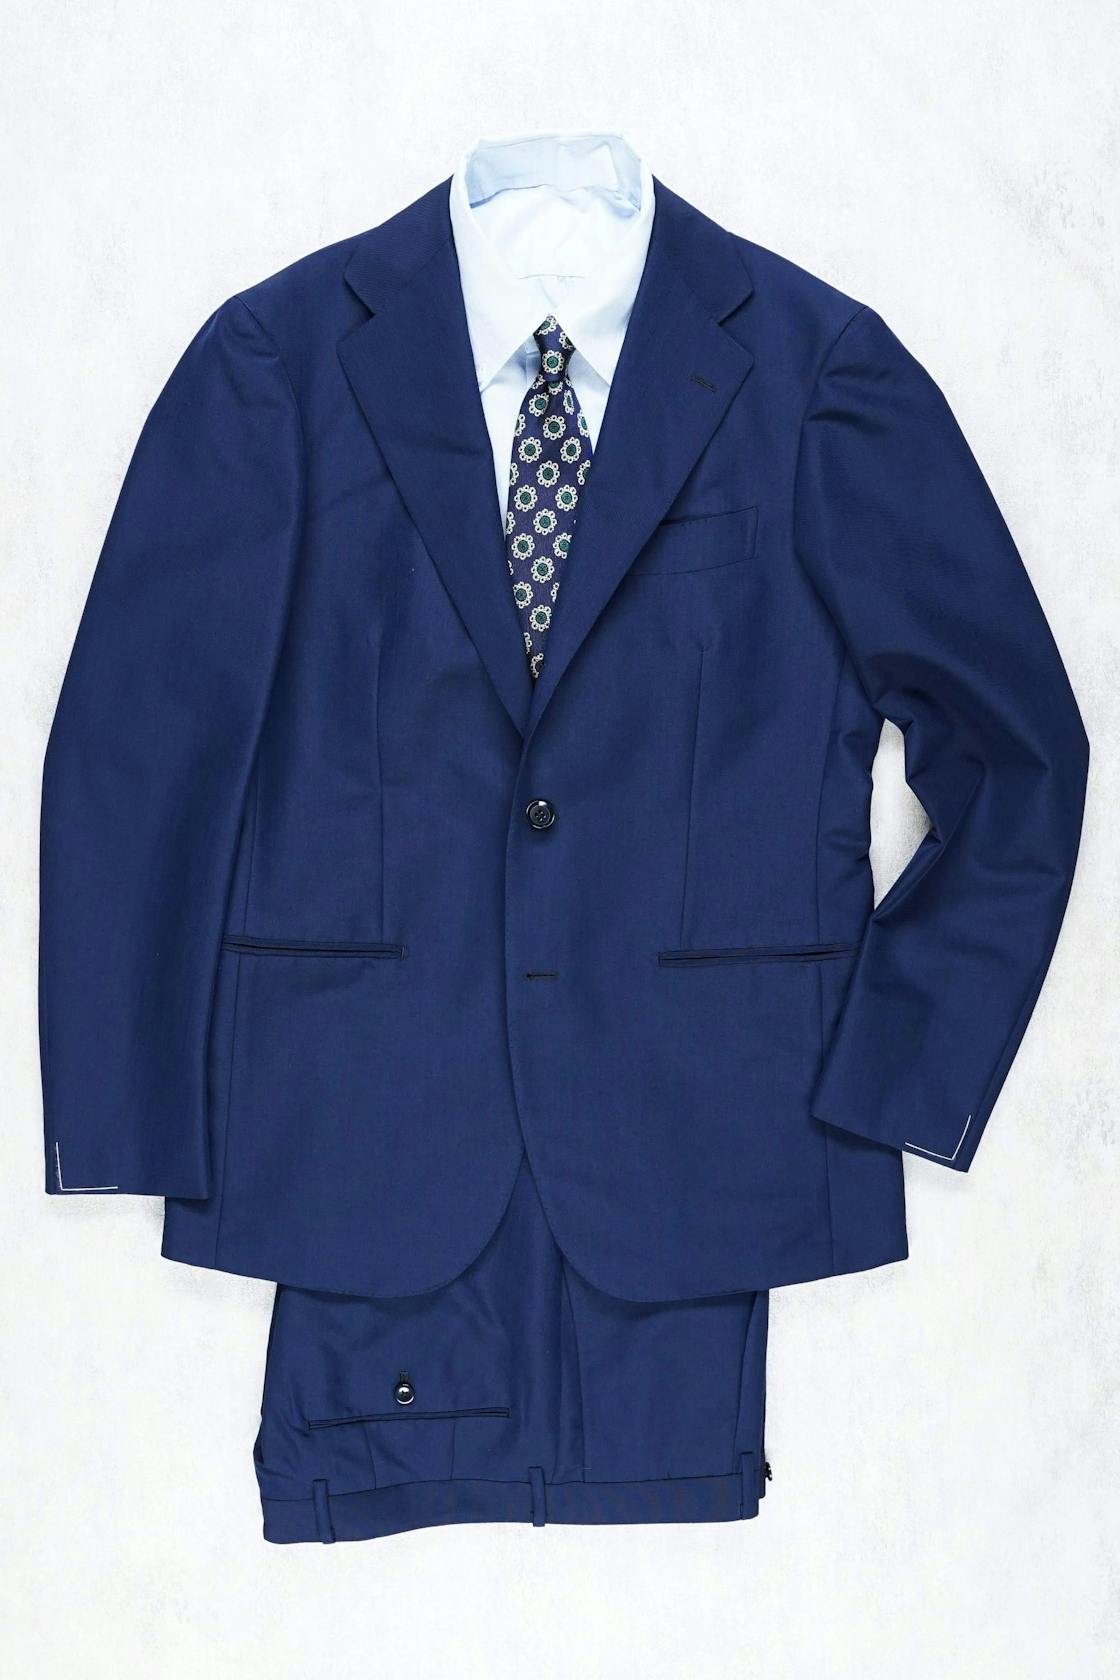 Ring Jacket 269 Navy Wool Canvas Suit